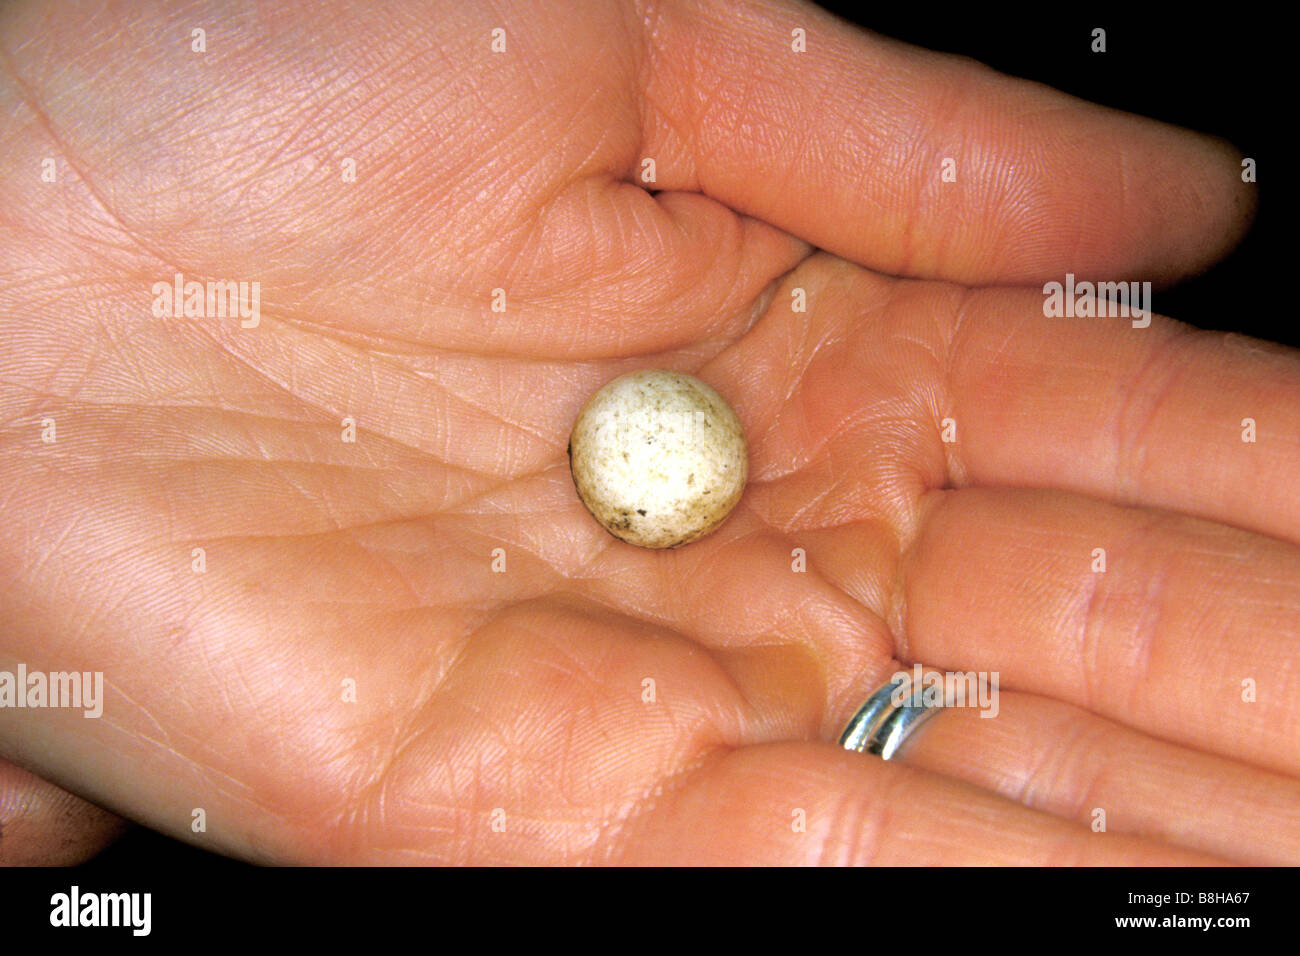 The egg of a Short-nosed Echidna, Short-beaked Echidna, Spiny Anteater (Tachyglossus aculeatus) on the palm of a hand Stock Photo